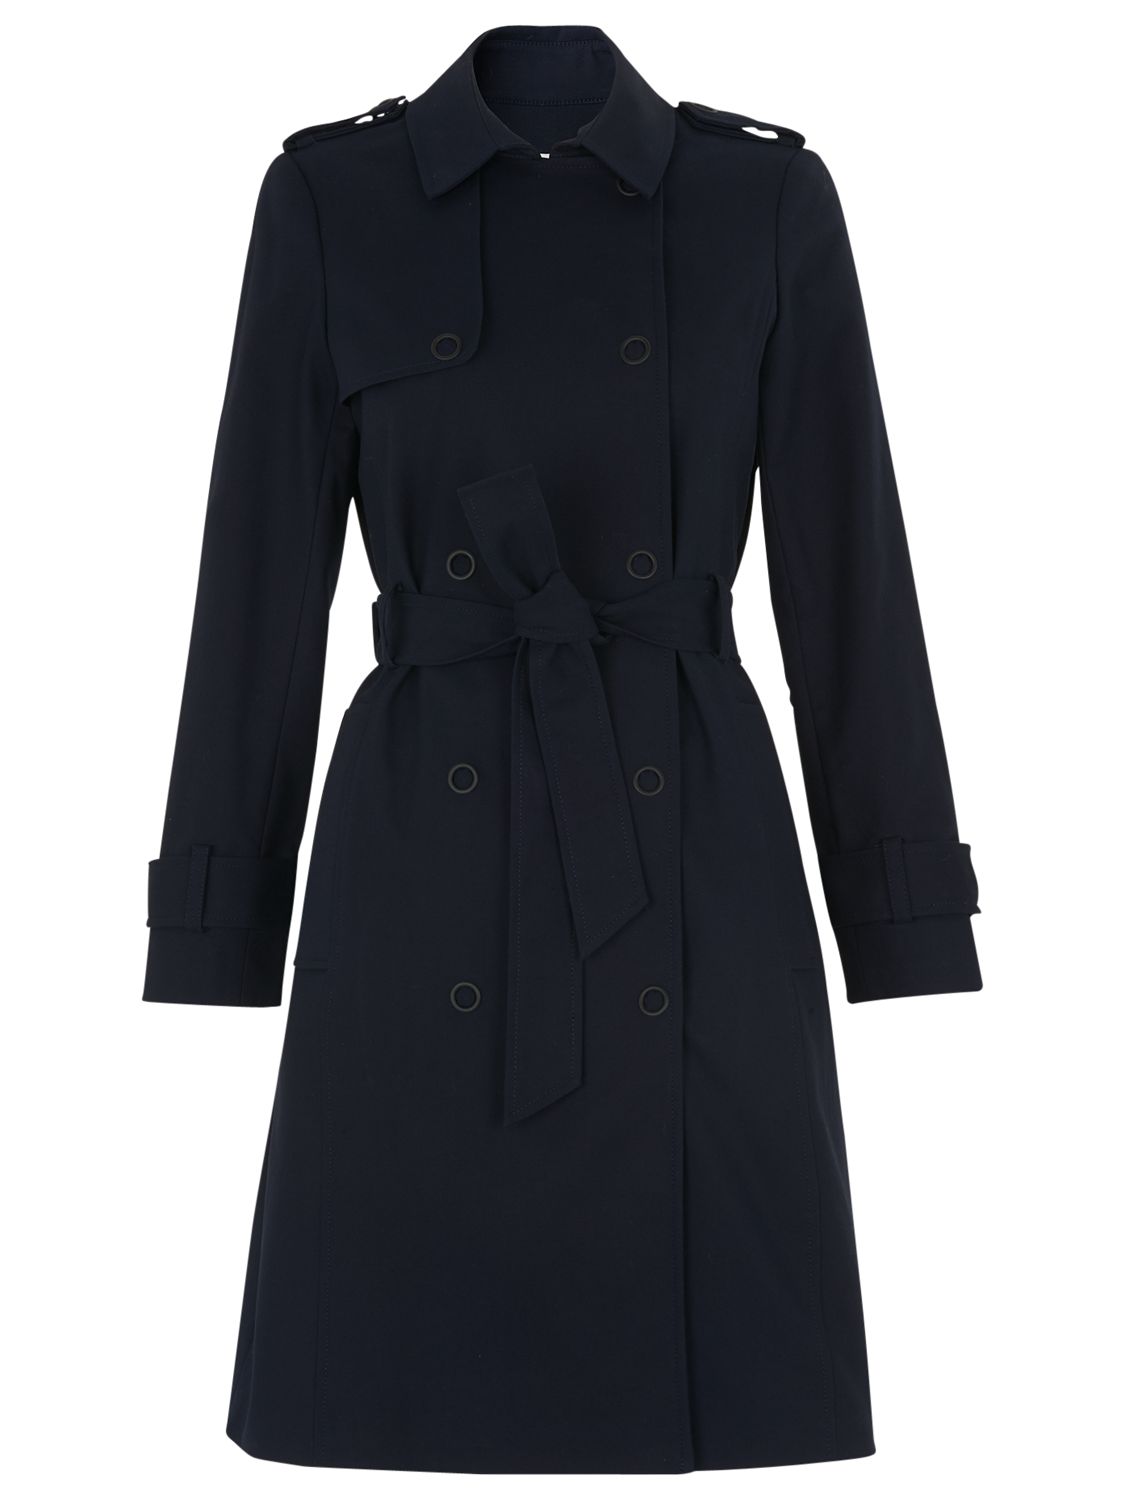 Whistles Sofia Trench Coat, Navy at John Lewis & Partners